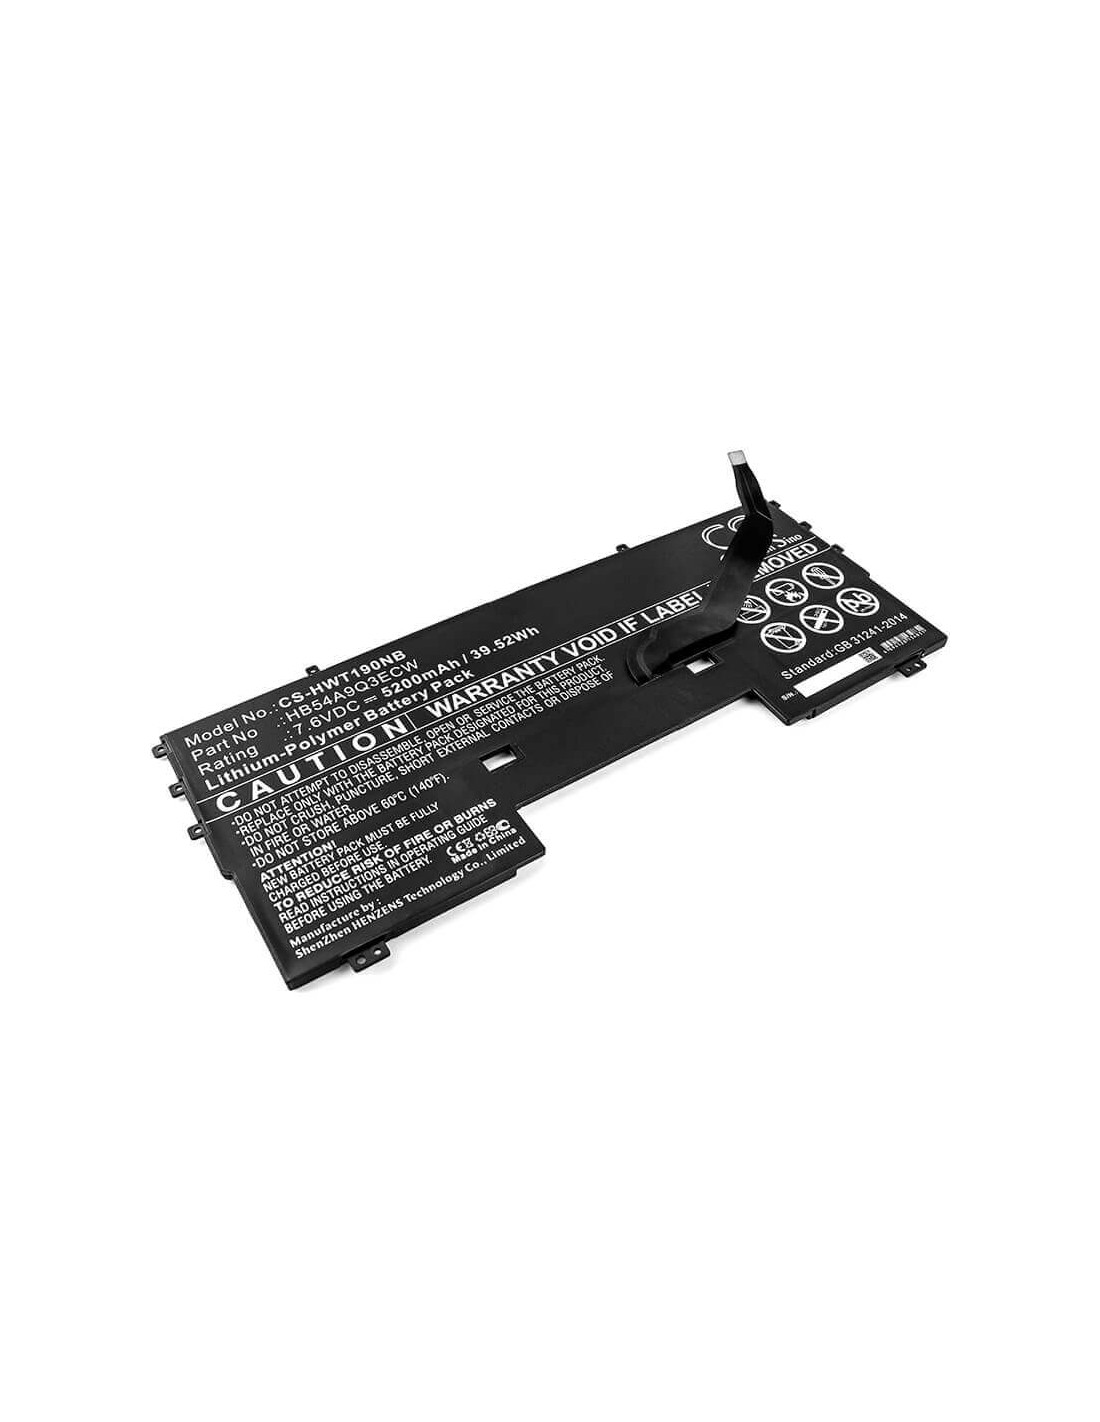 Battery for Huawei, Matebook X, Wt-w09, Wt-w19 7.6V, 5200mAh - 39.52Wh